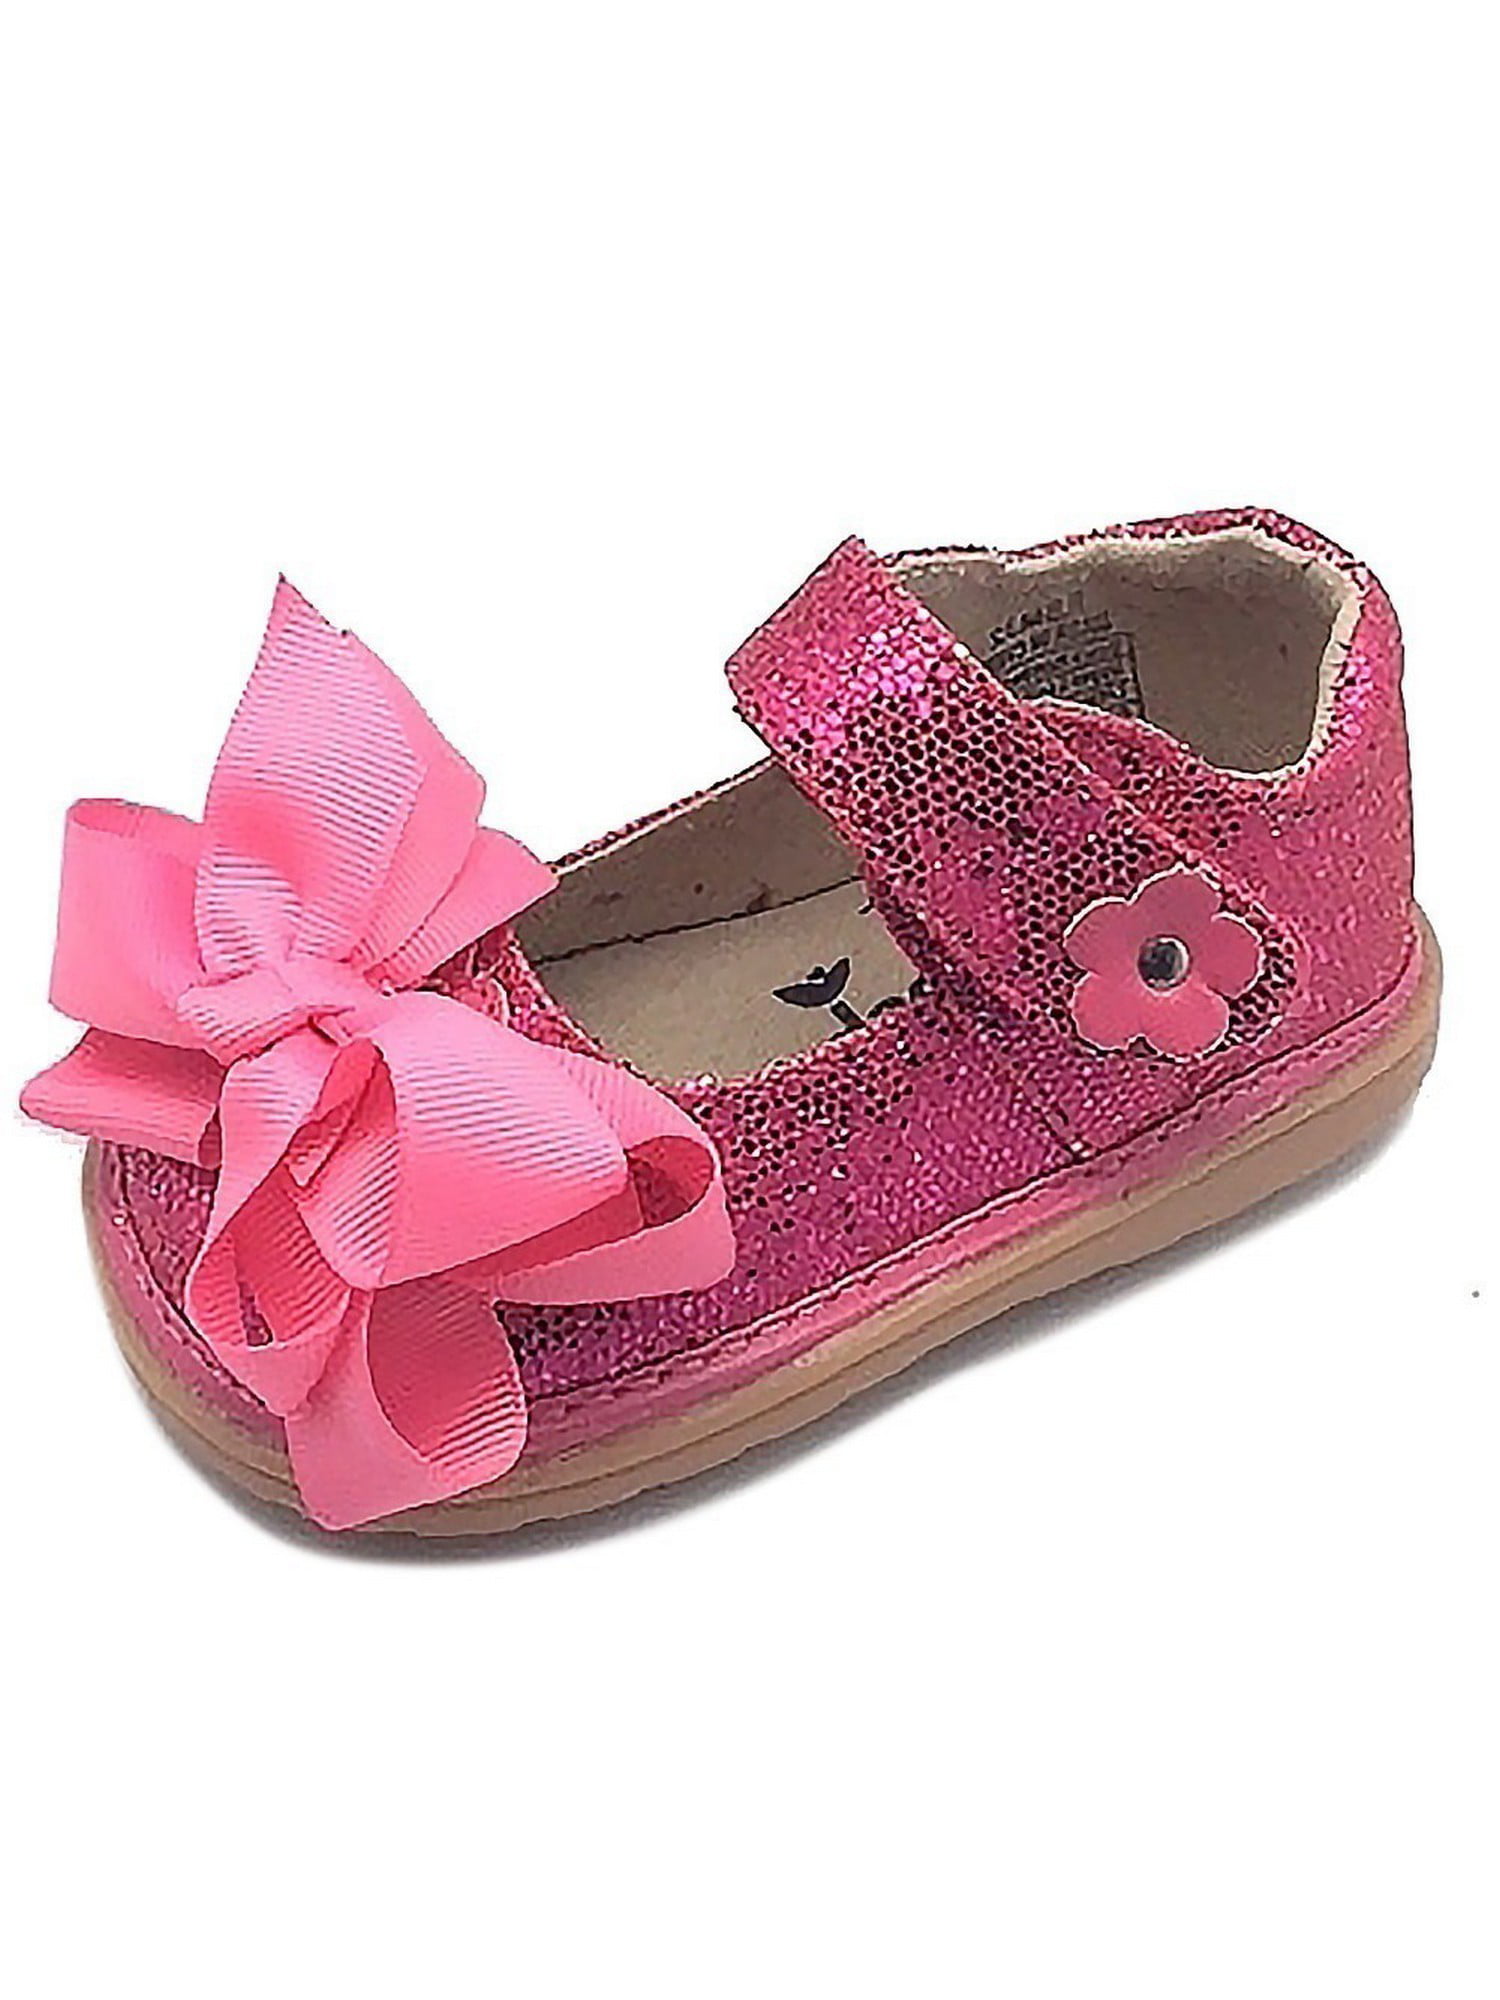 Squeakers Squeaky Shoes NIB SALE Toddler Pink Sparkle Bow 2 Styles in 1 